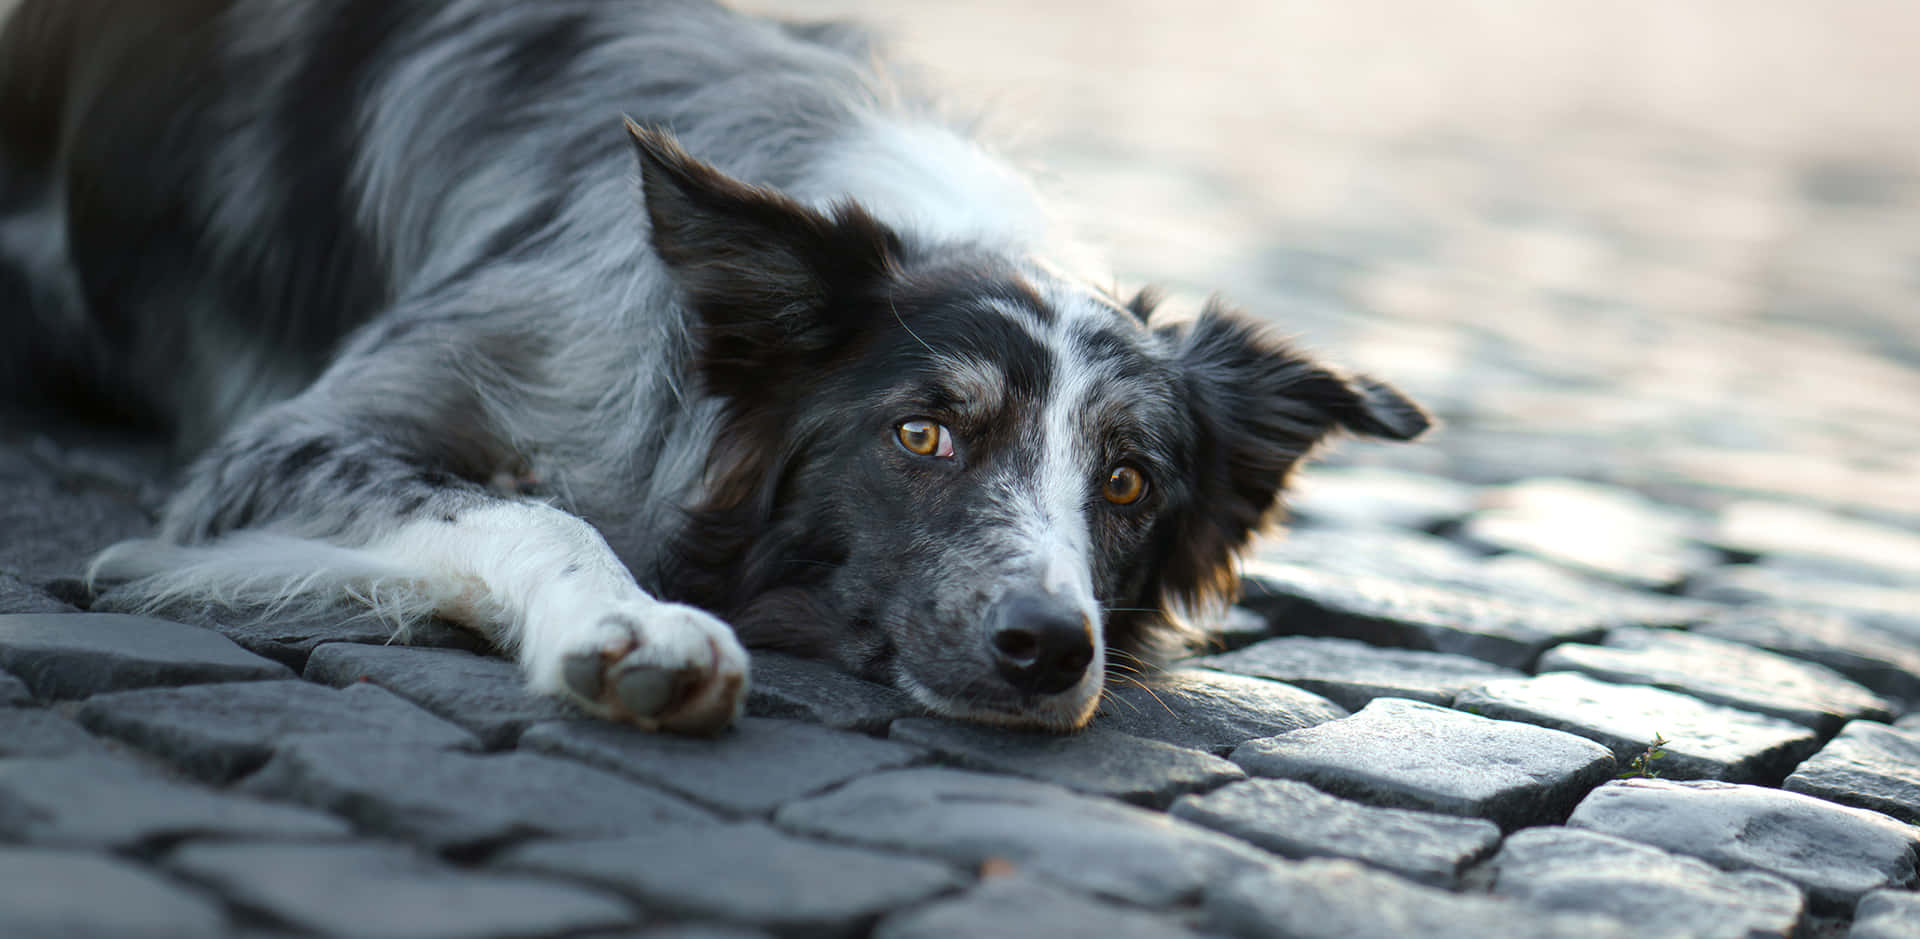 "This border collie shows how friendly and loyal they can be!"